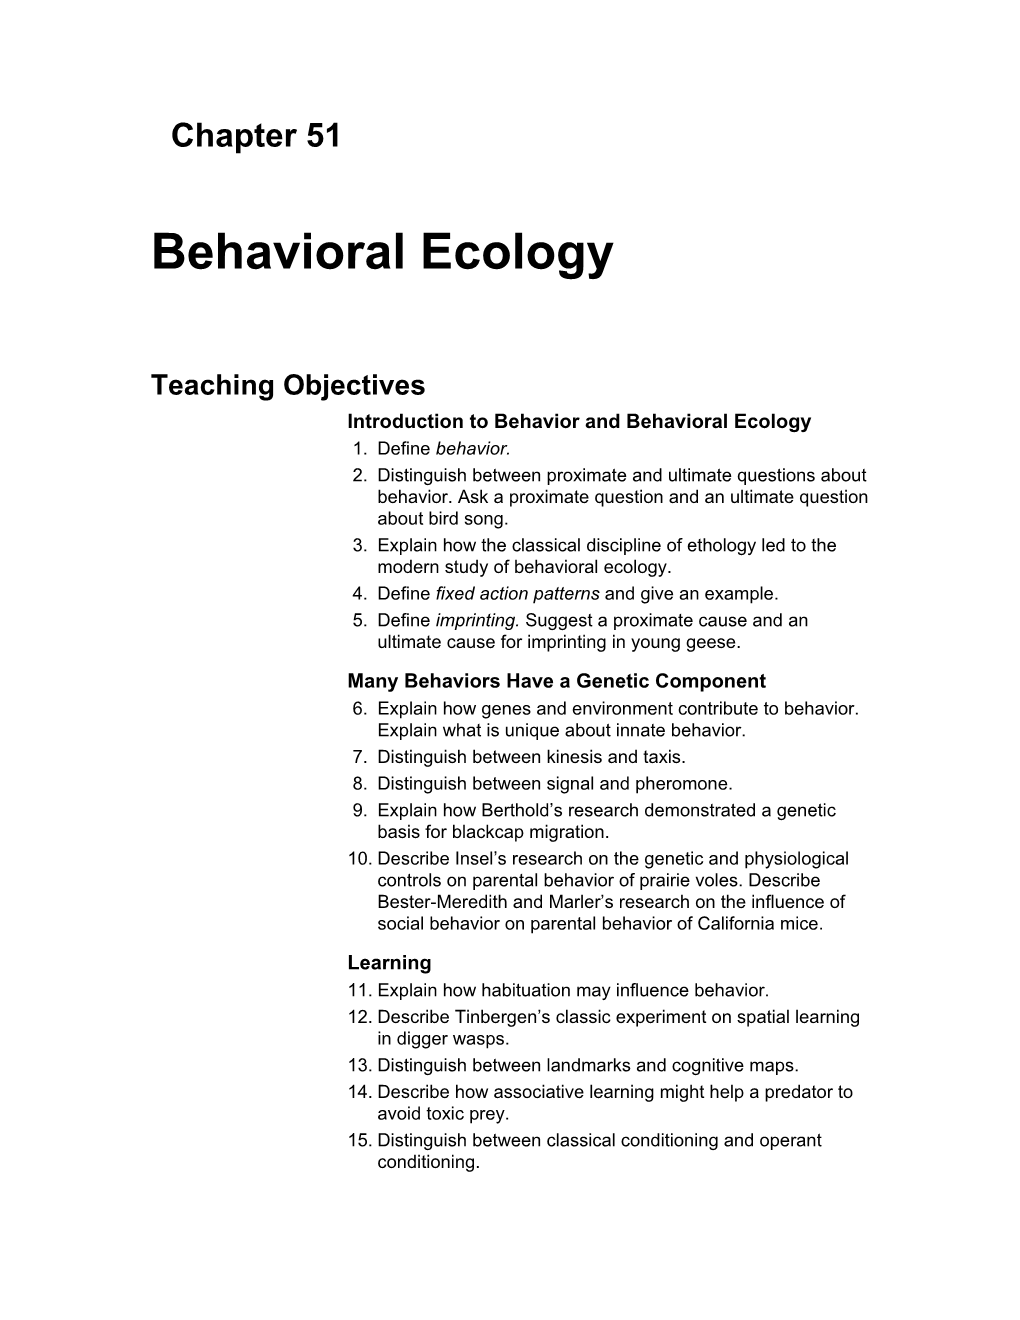 Introduction to Behavior and Behavioral Ecology